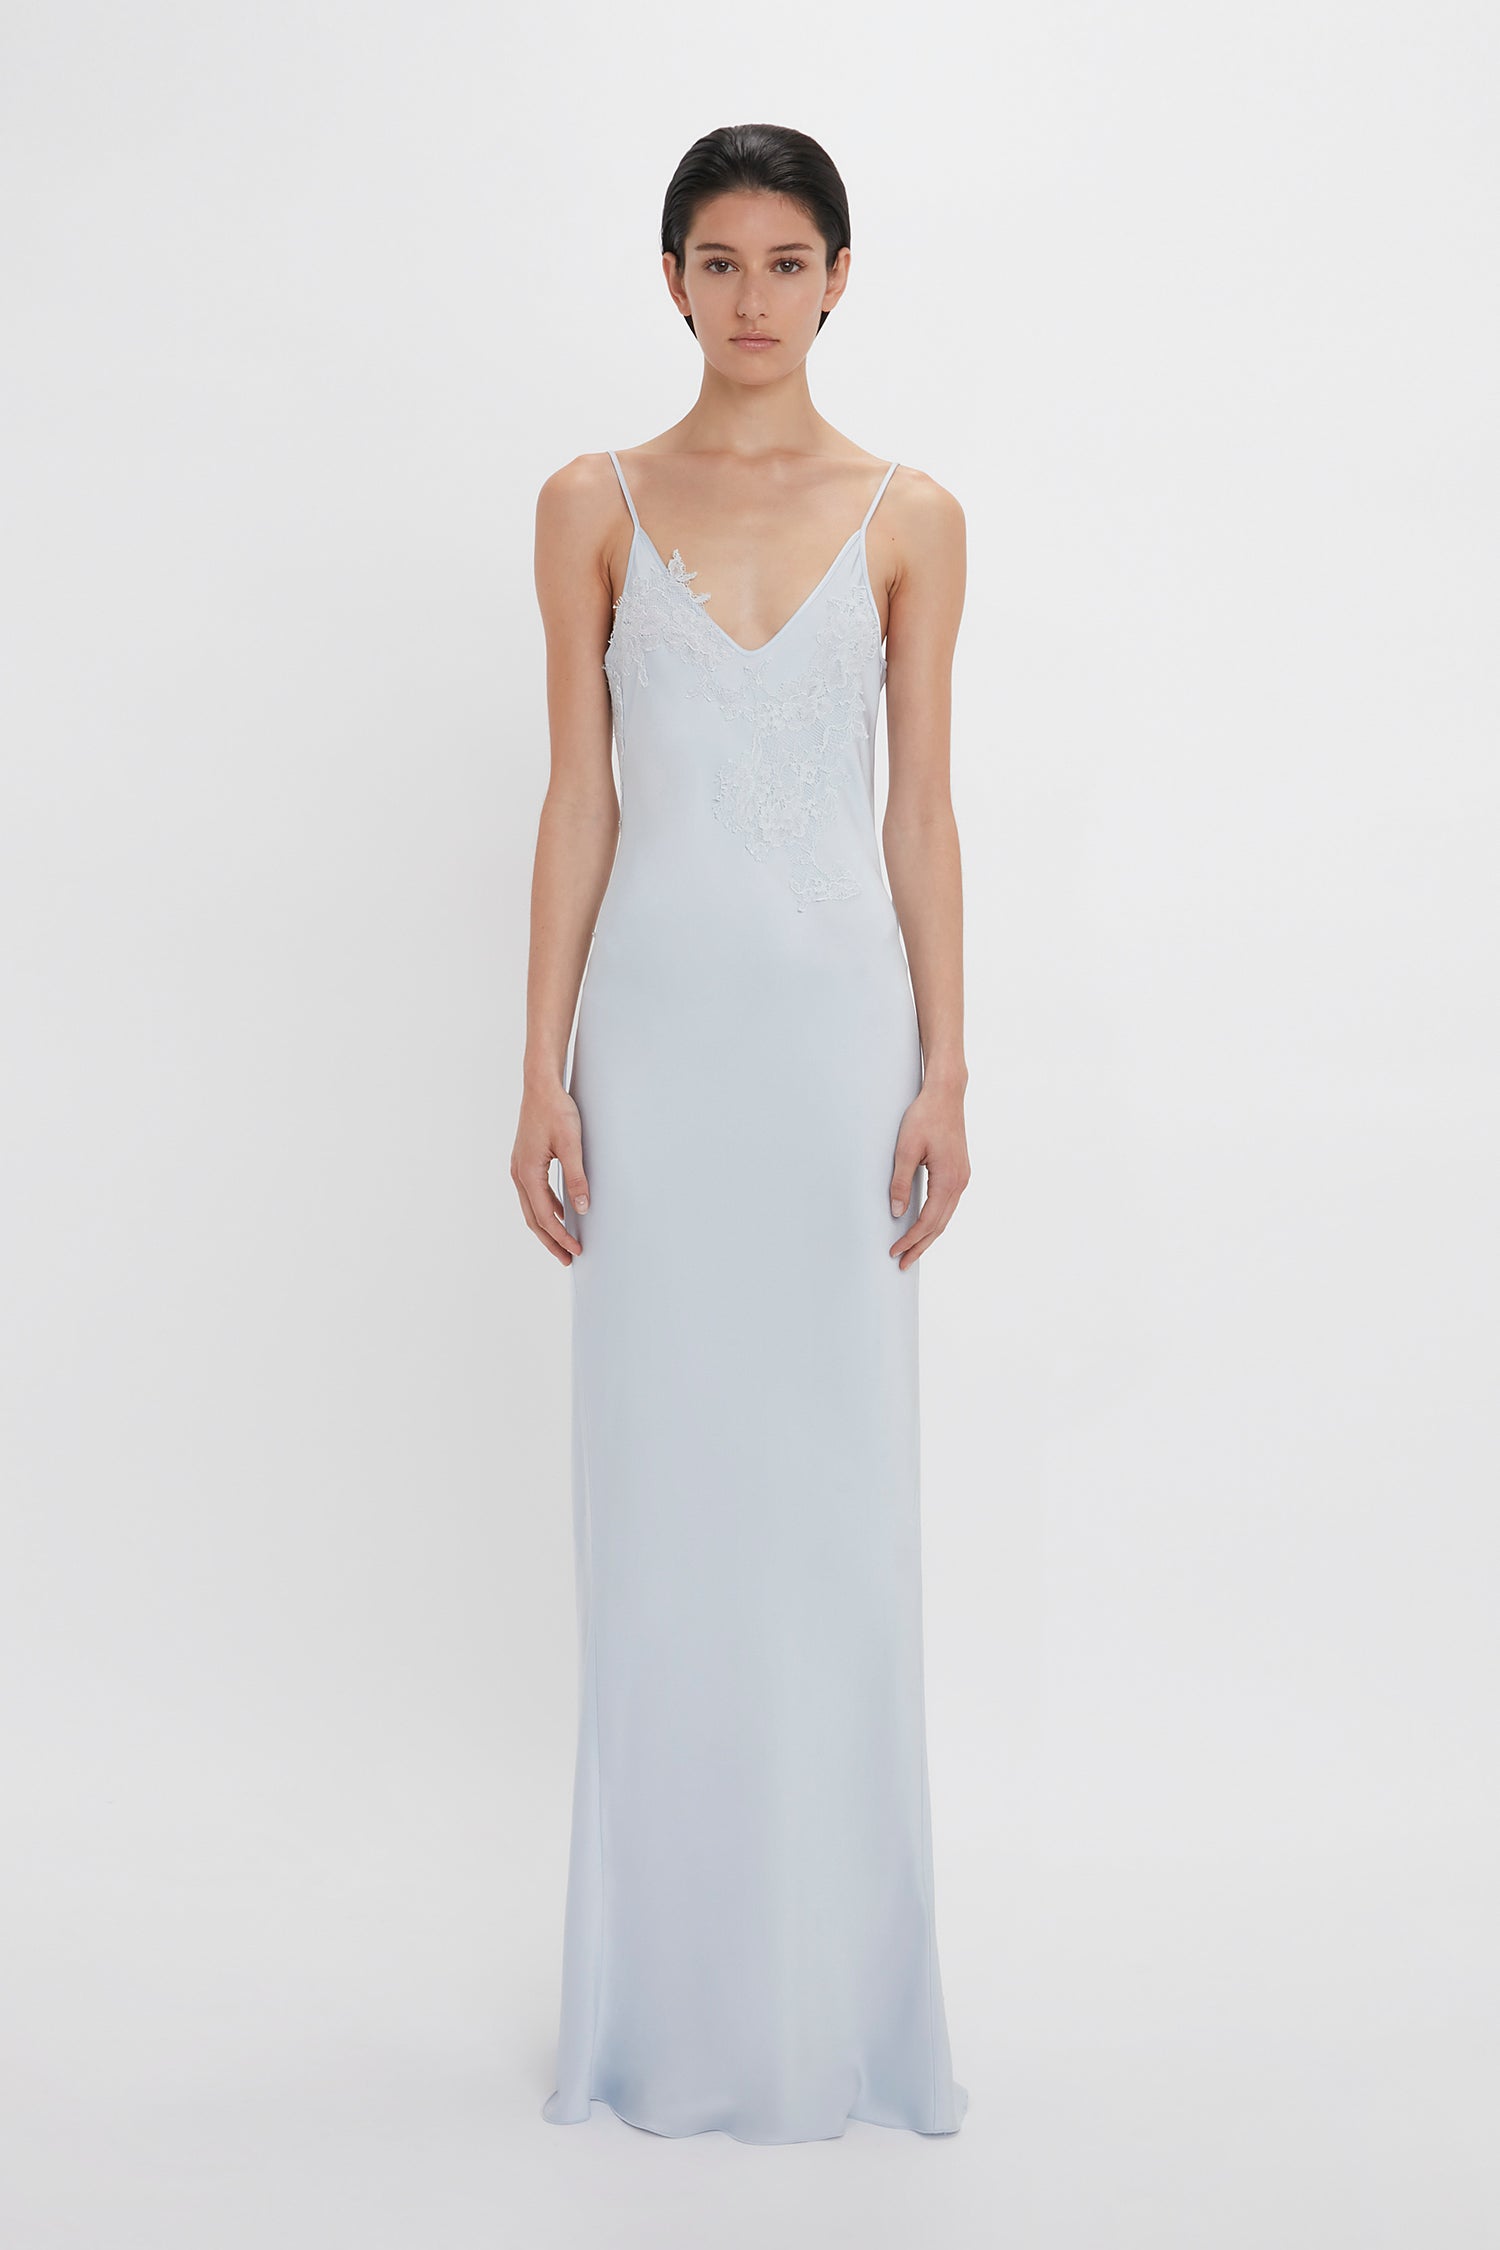 A woman wearing a Victoria Beckham Exclusive Lace Detail Floor-Length Cami Dress In Ice, standing against a white background.